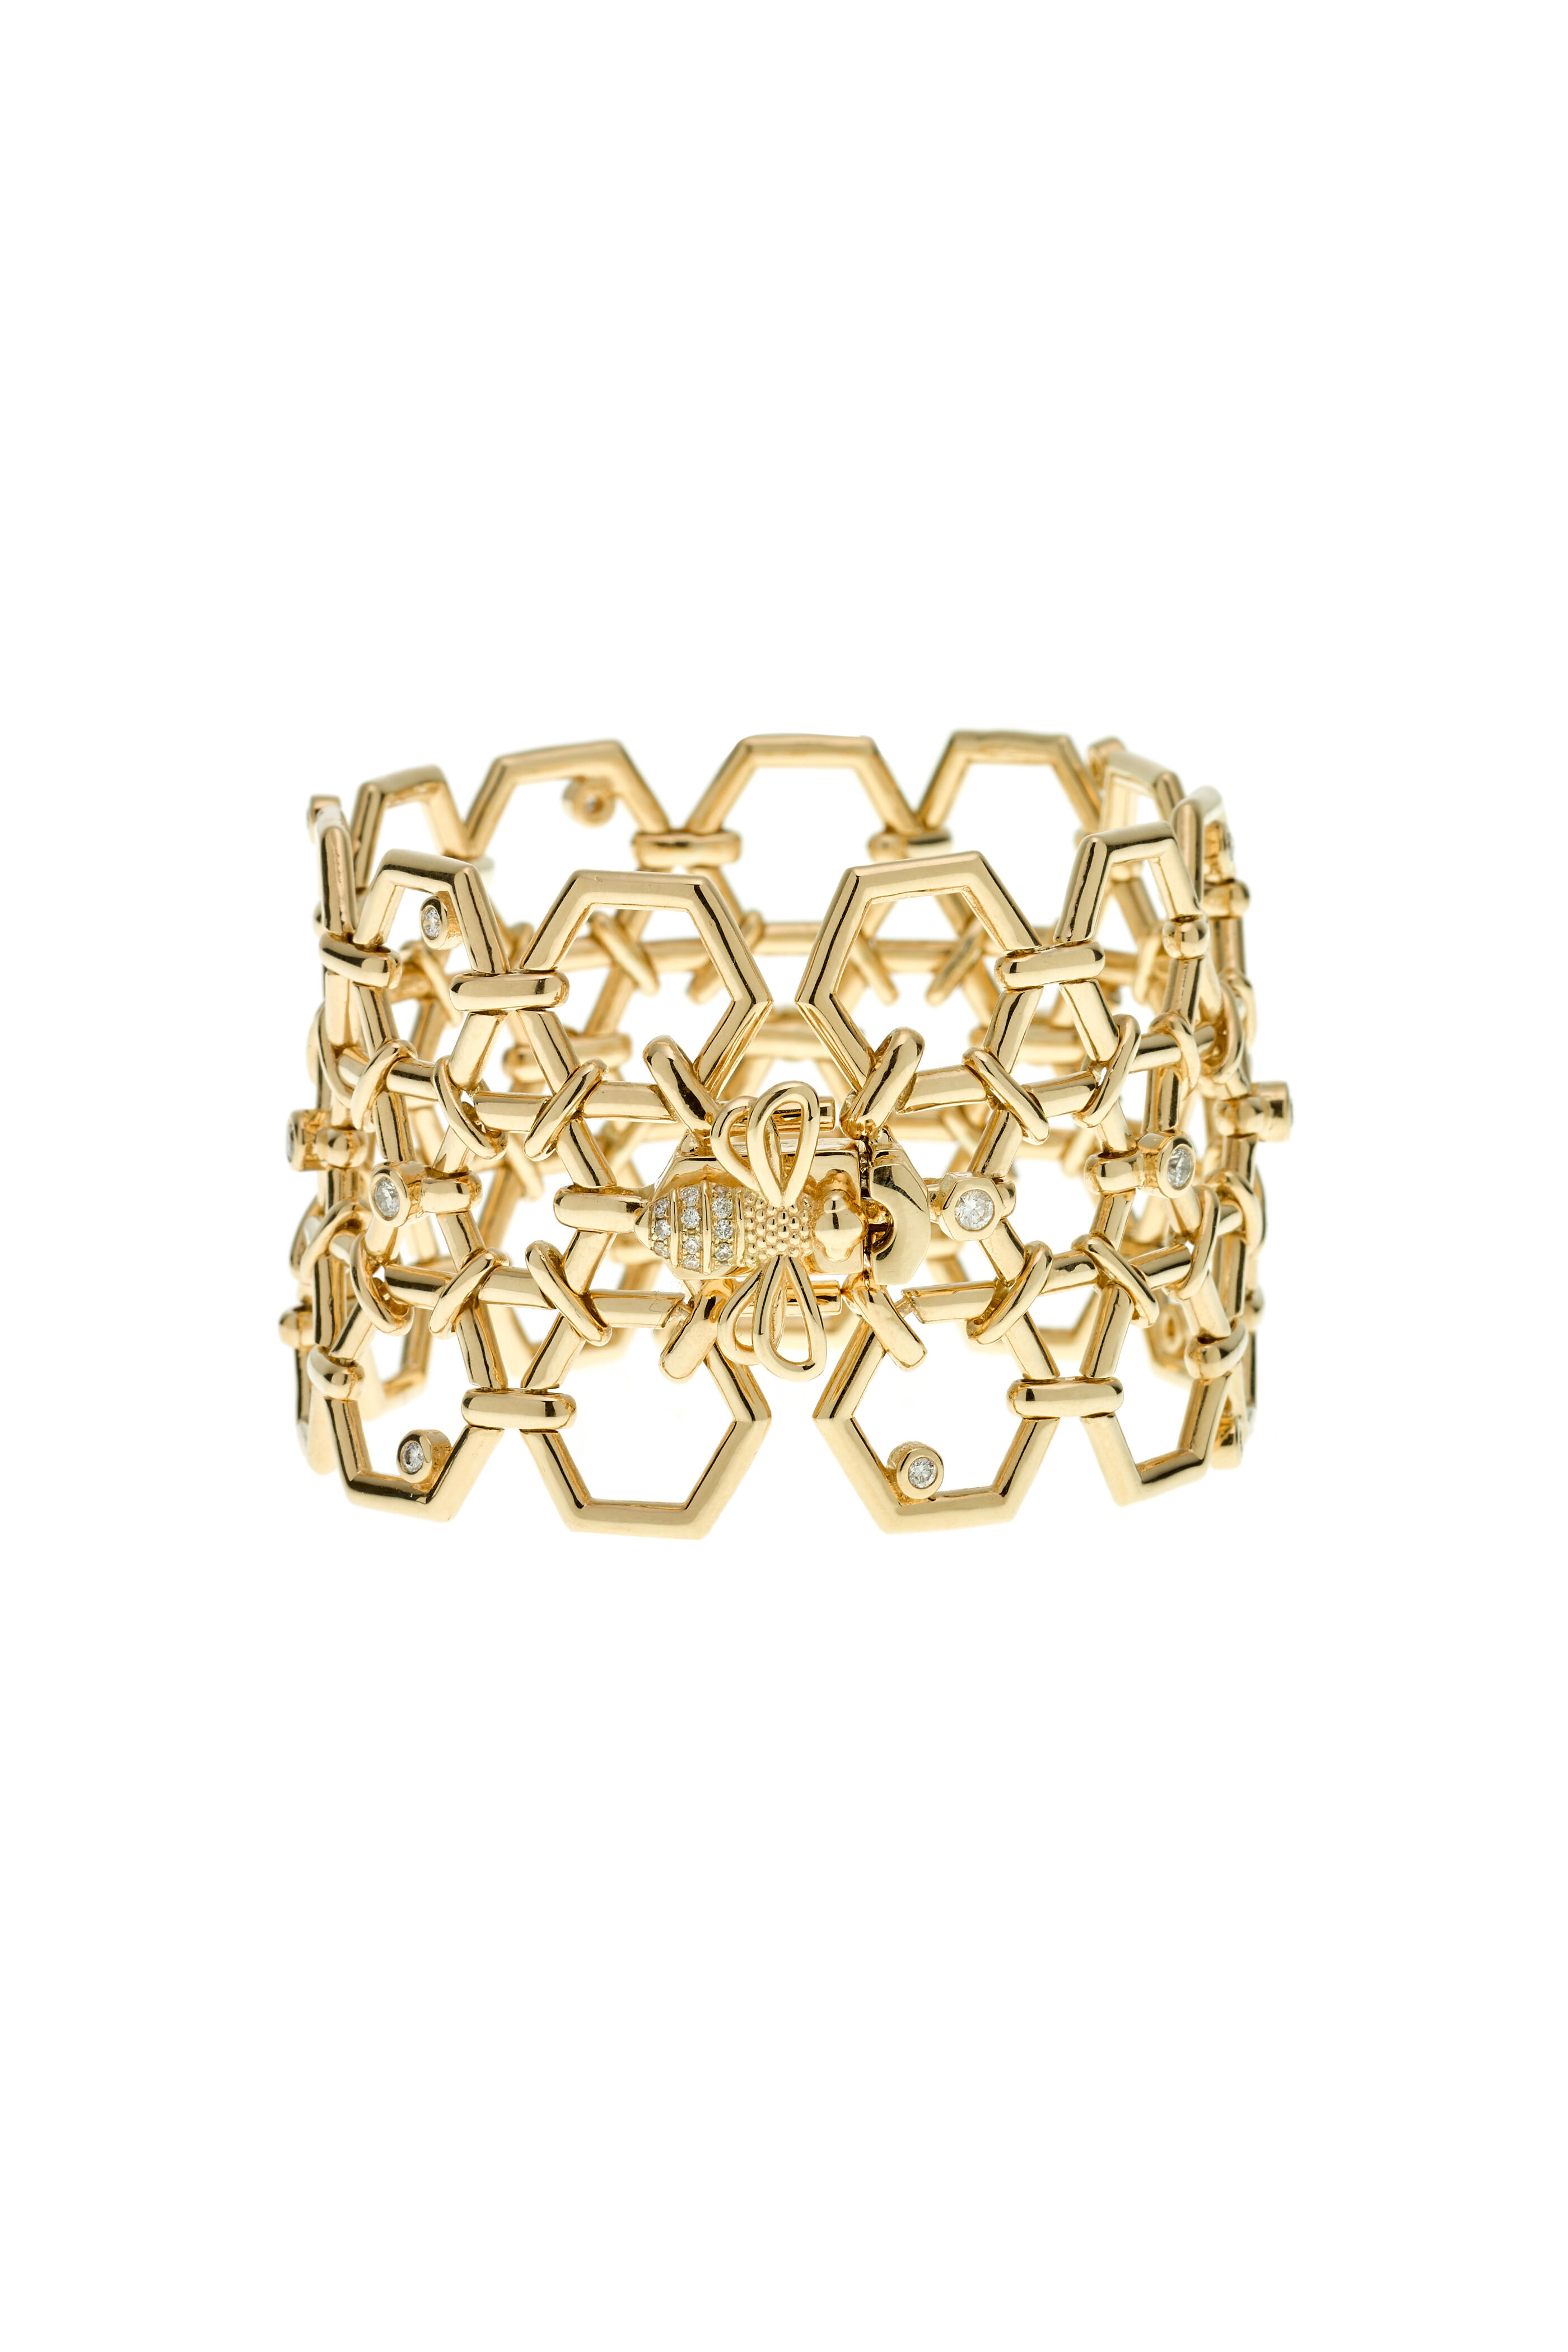 Temple St. Clair - 18K Yellow Gold Beehive Link Bracelet